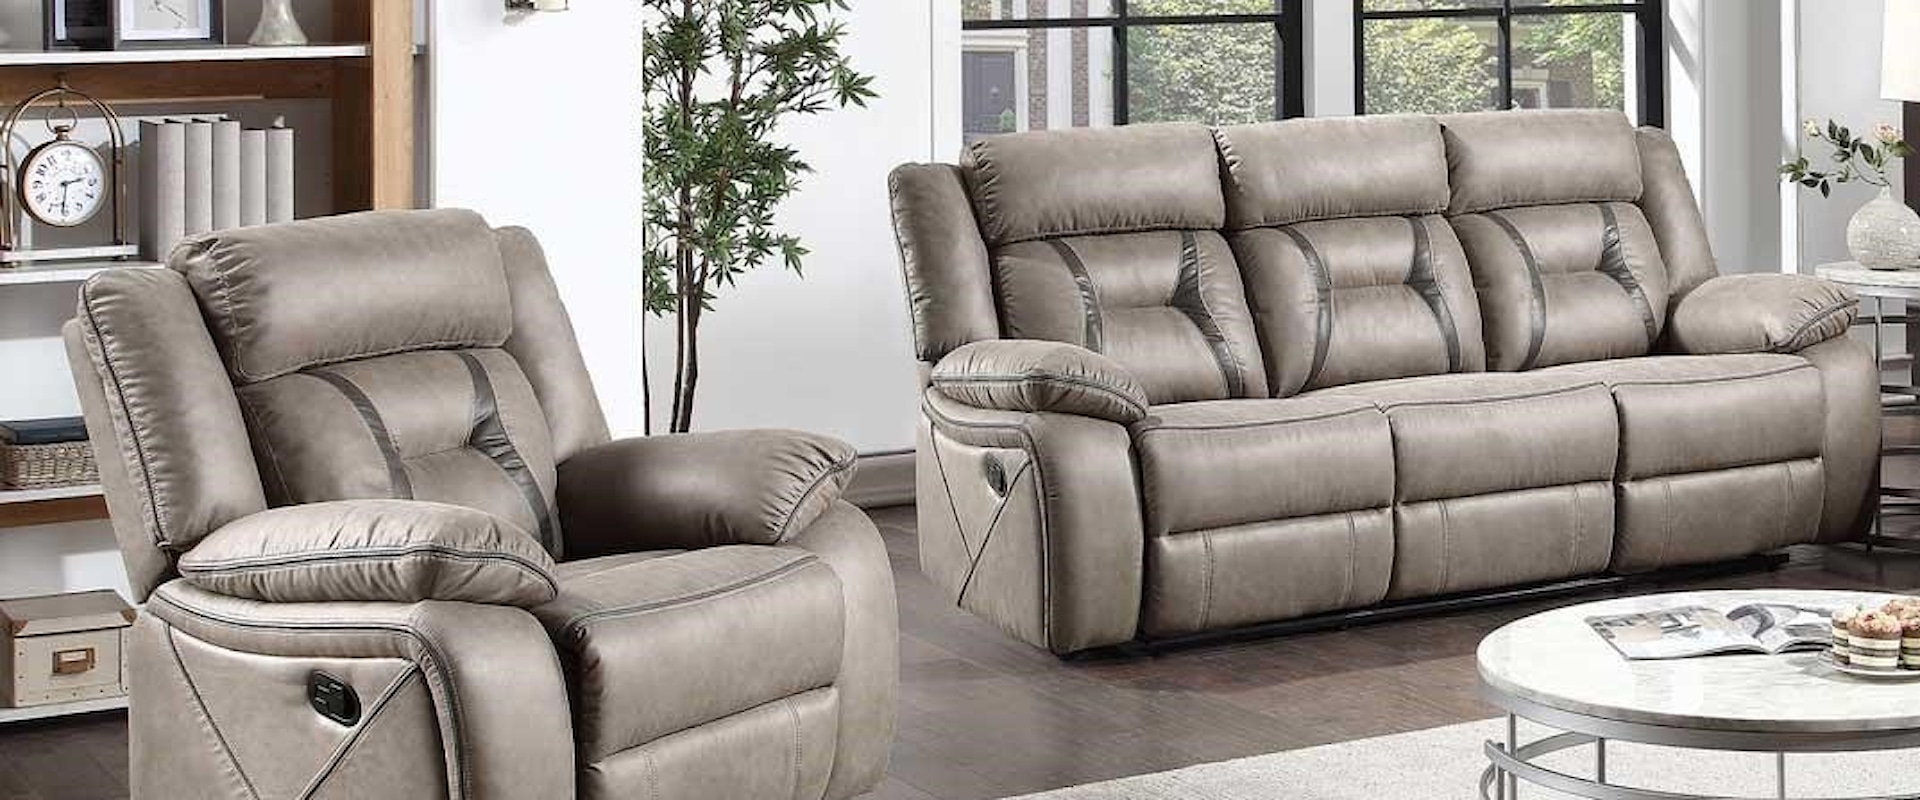 Manual Reclining Sofa with Drop Down Console and Glider Recliner Set